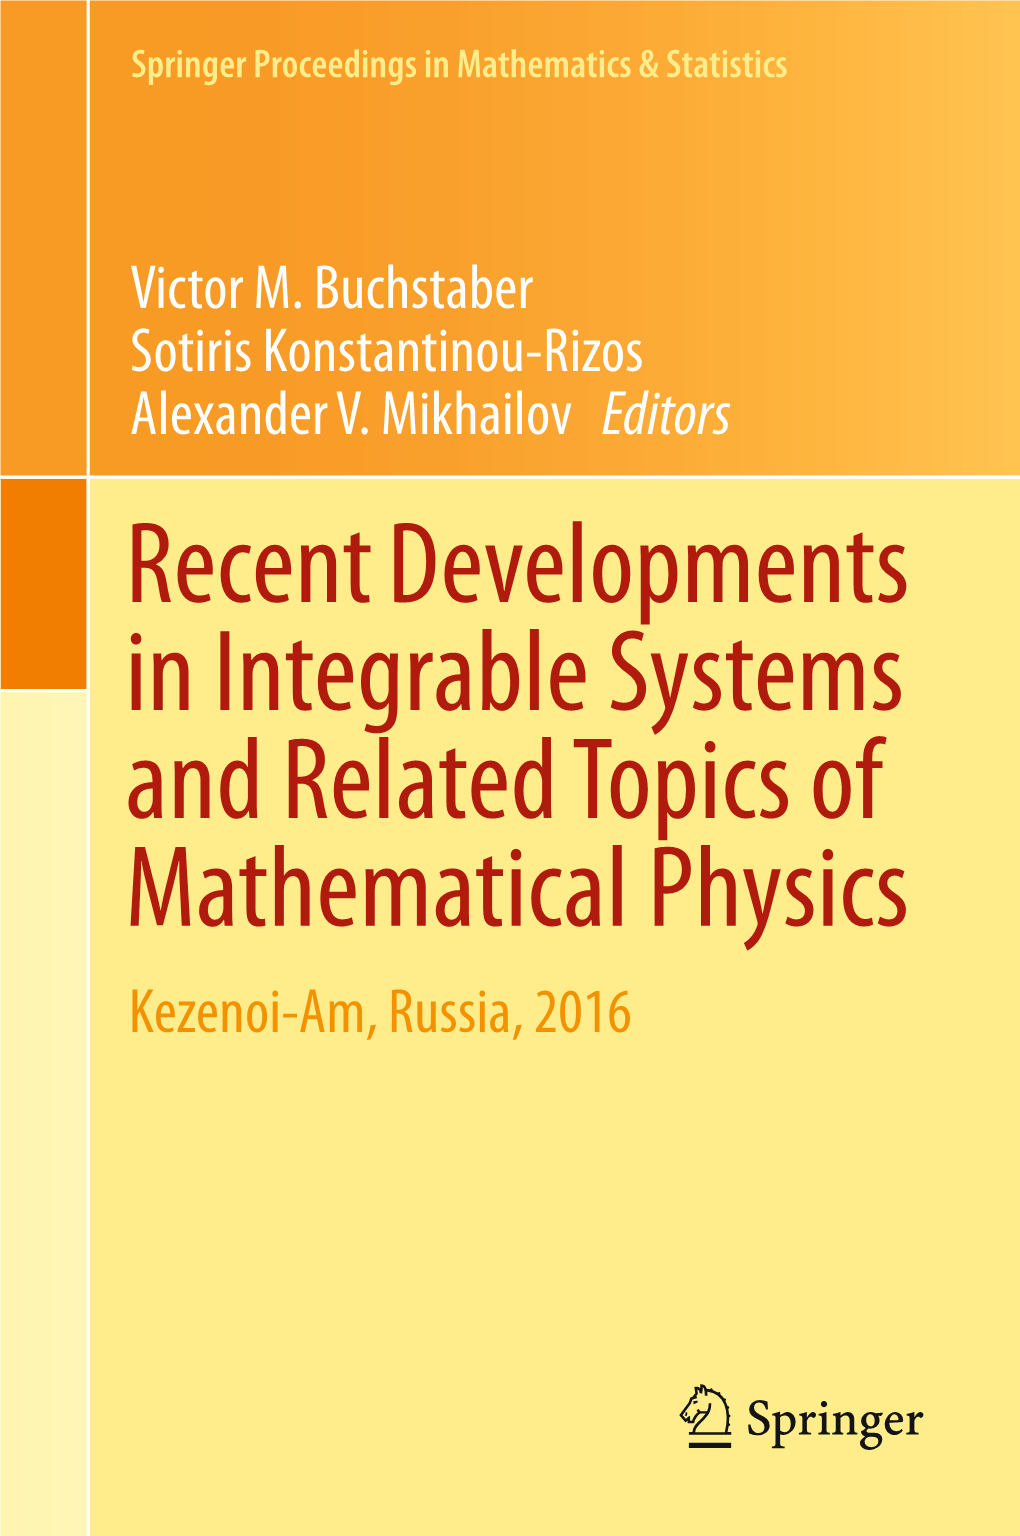 Recent Developments in Integrable Systems and Related Topics of Mathematical Physics Kezenoi-Am, Russia, 2016 Springer Proceedings in Mathematics & Statistics